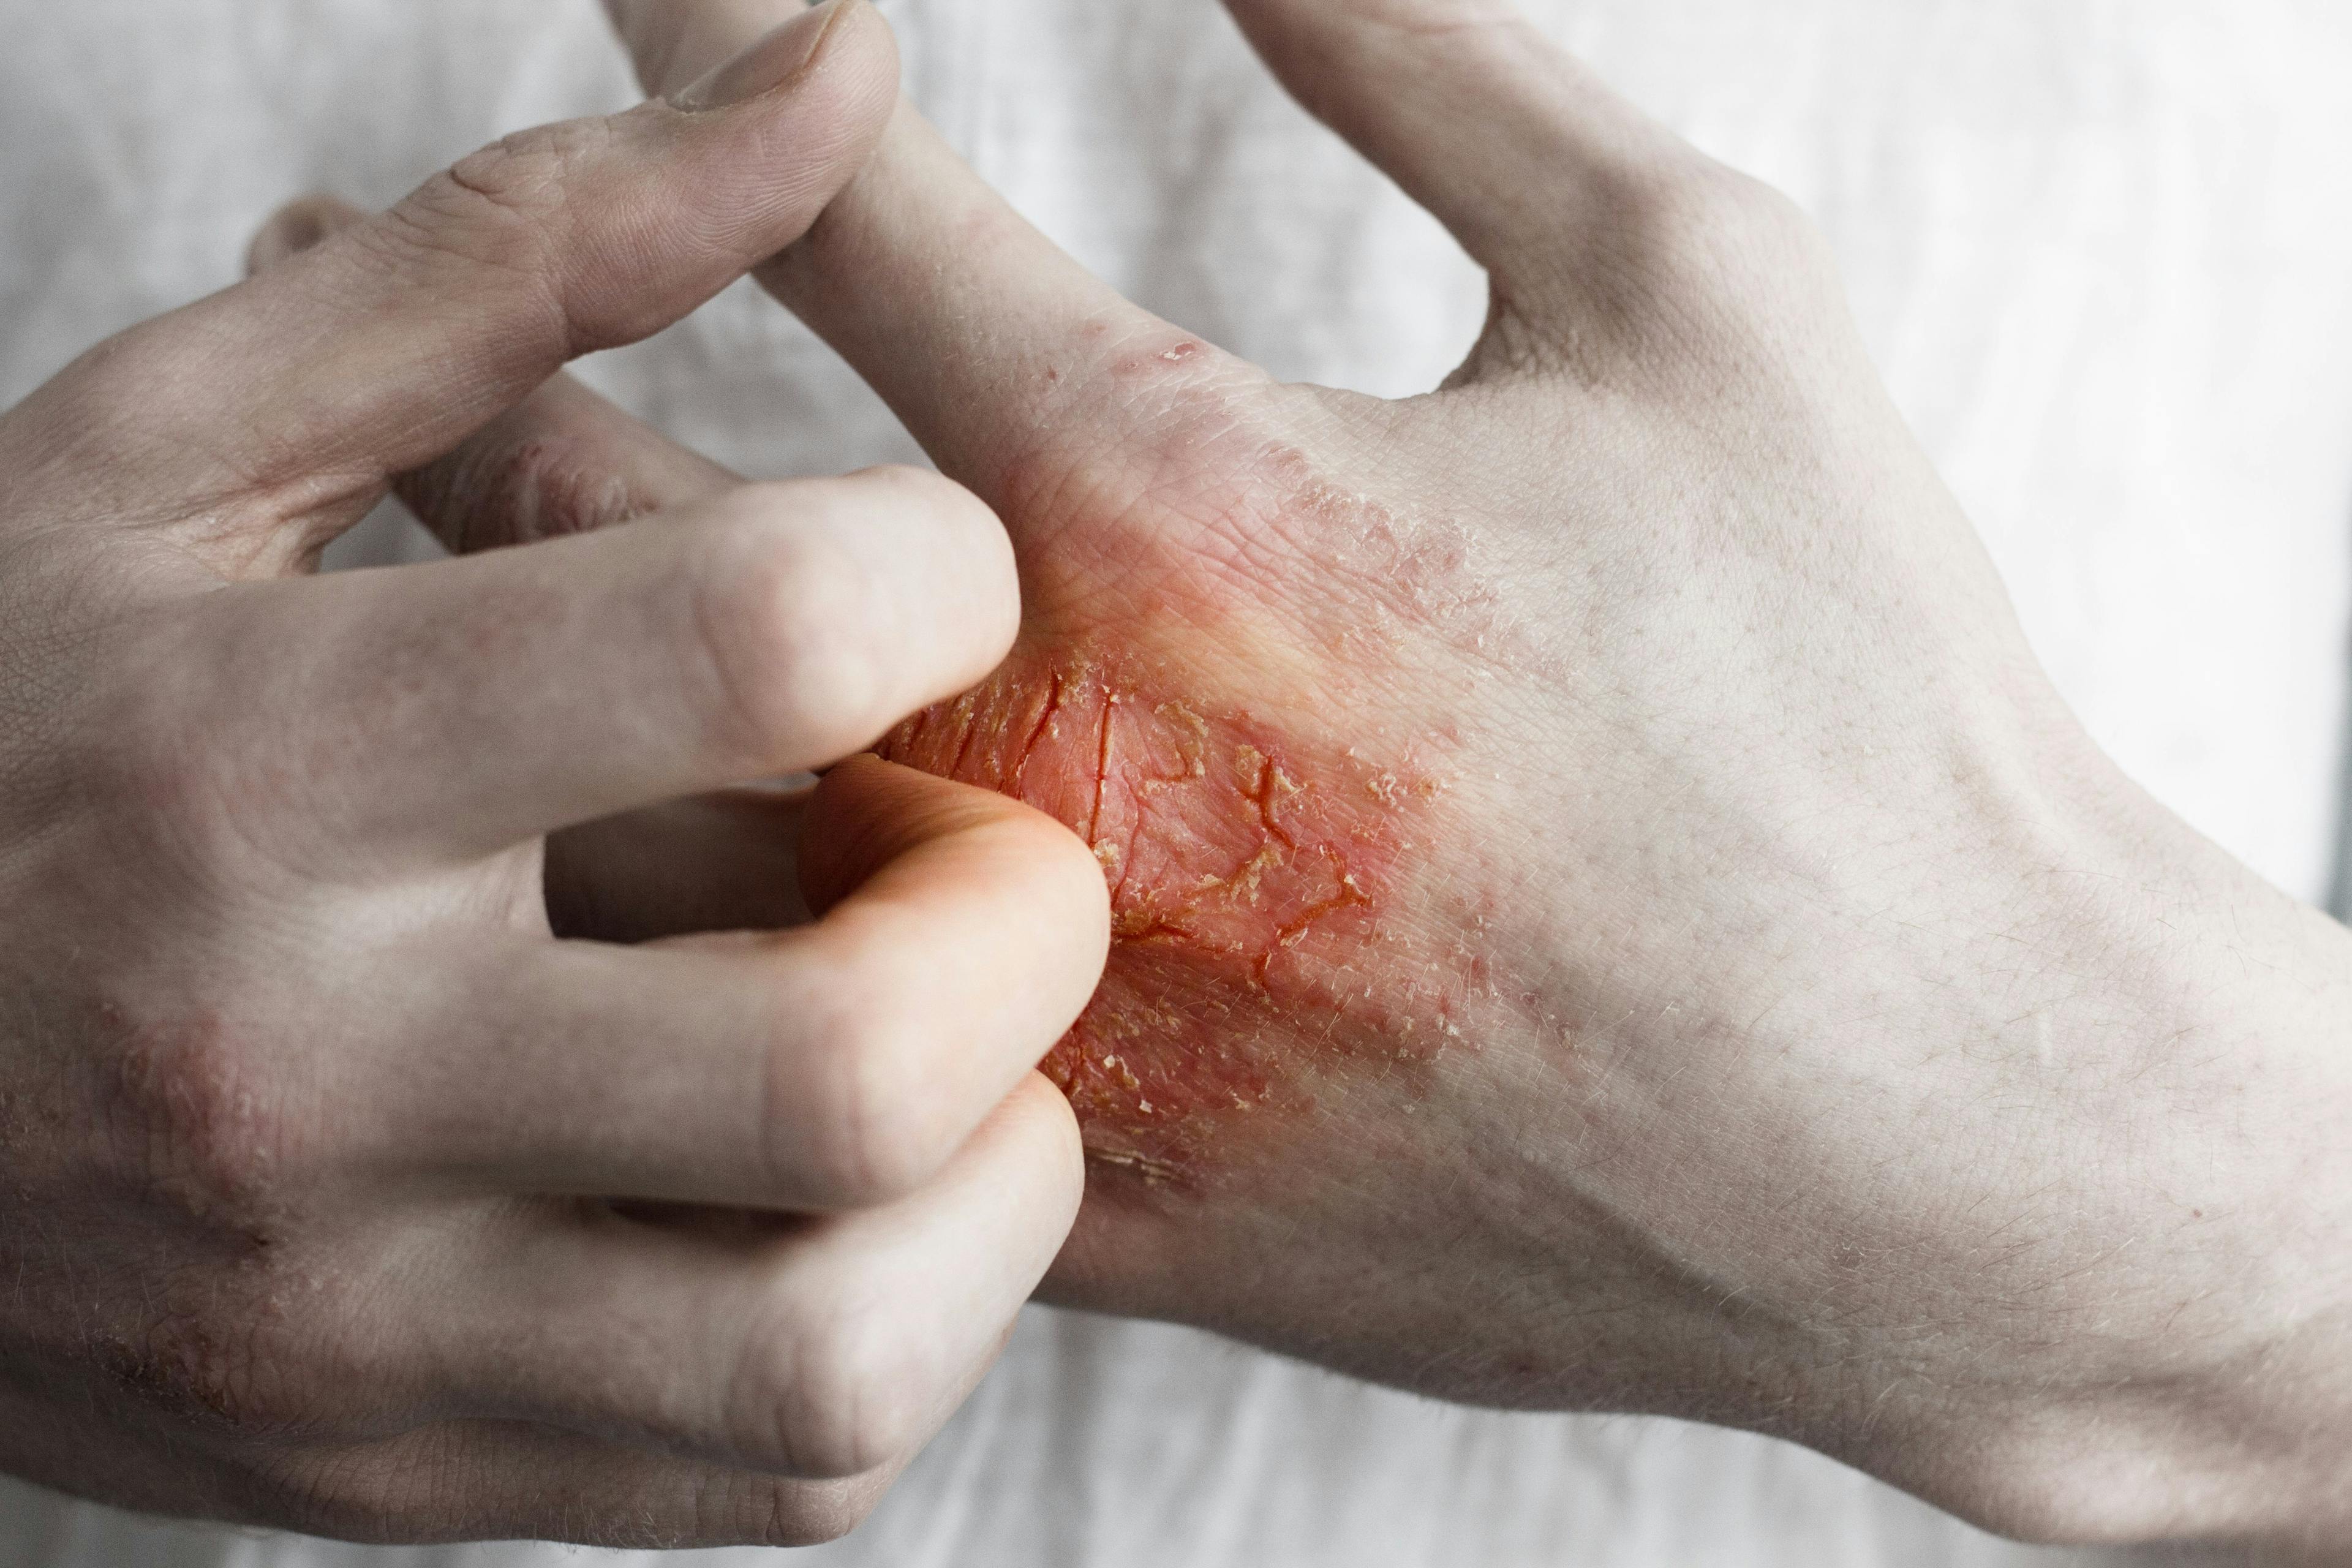 Study: Inhibiting S100A9 Gene in Skin Cells Reduces Severity of Psoriasis, Psoriatic Arthritis